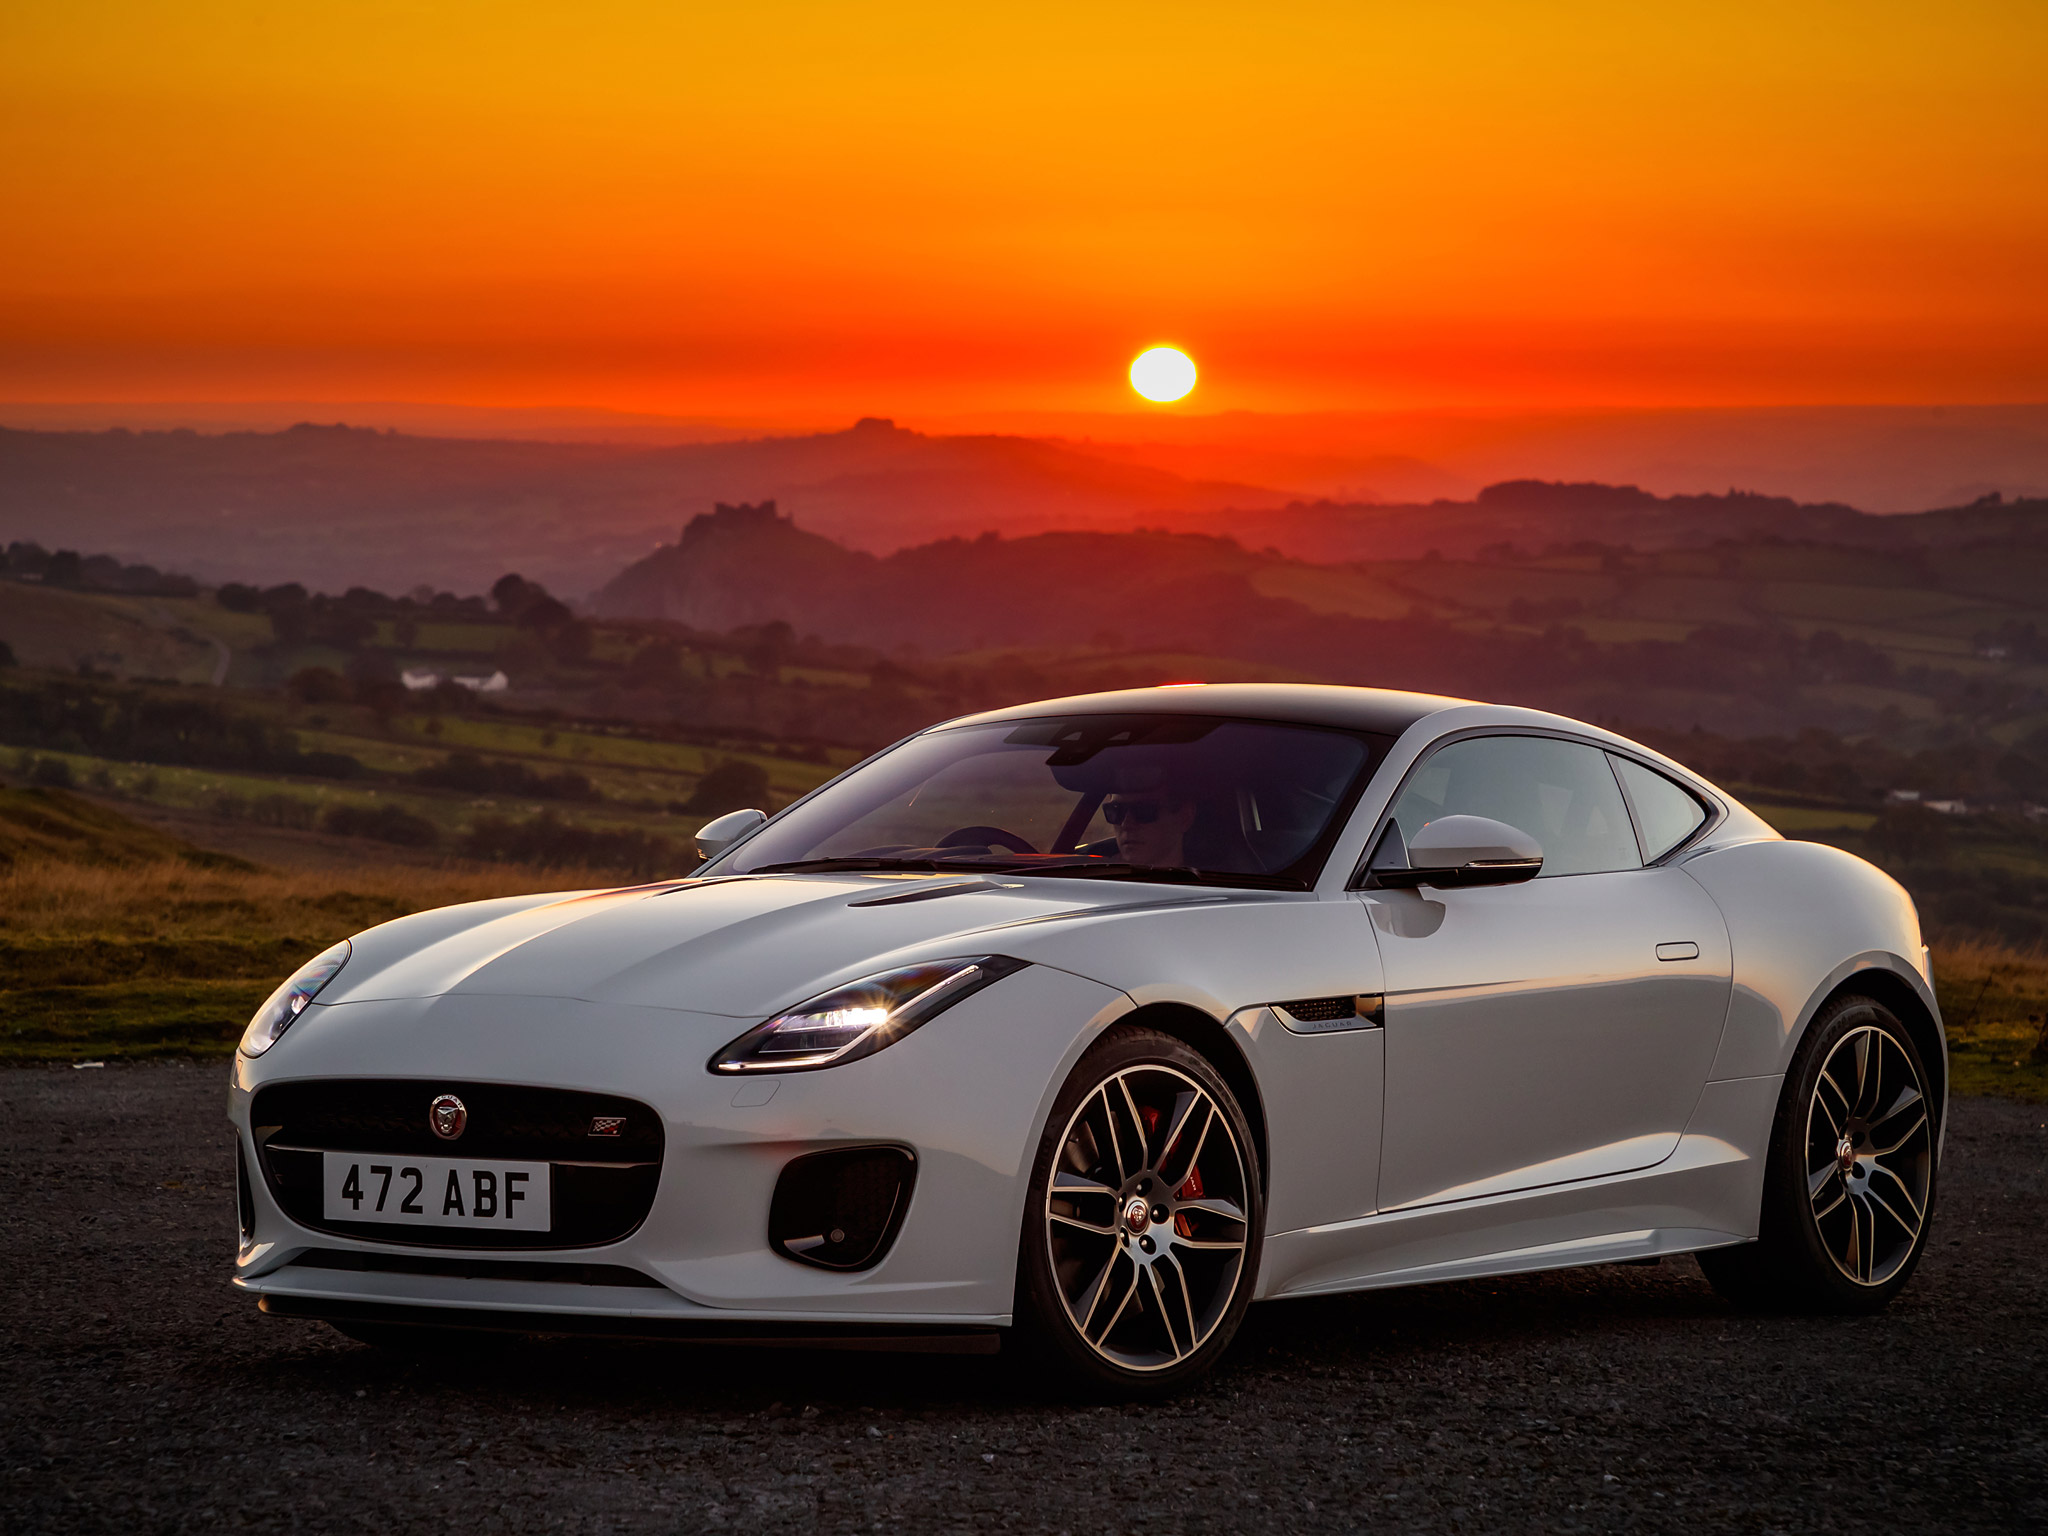  2019 Jaguar F-Type Chequered Flag Edition Wallpaper.